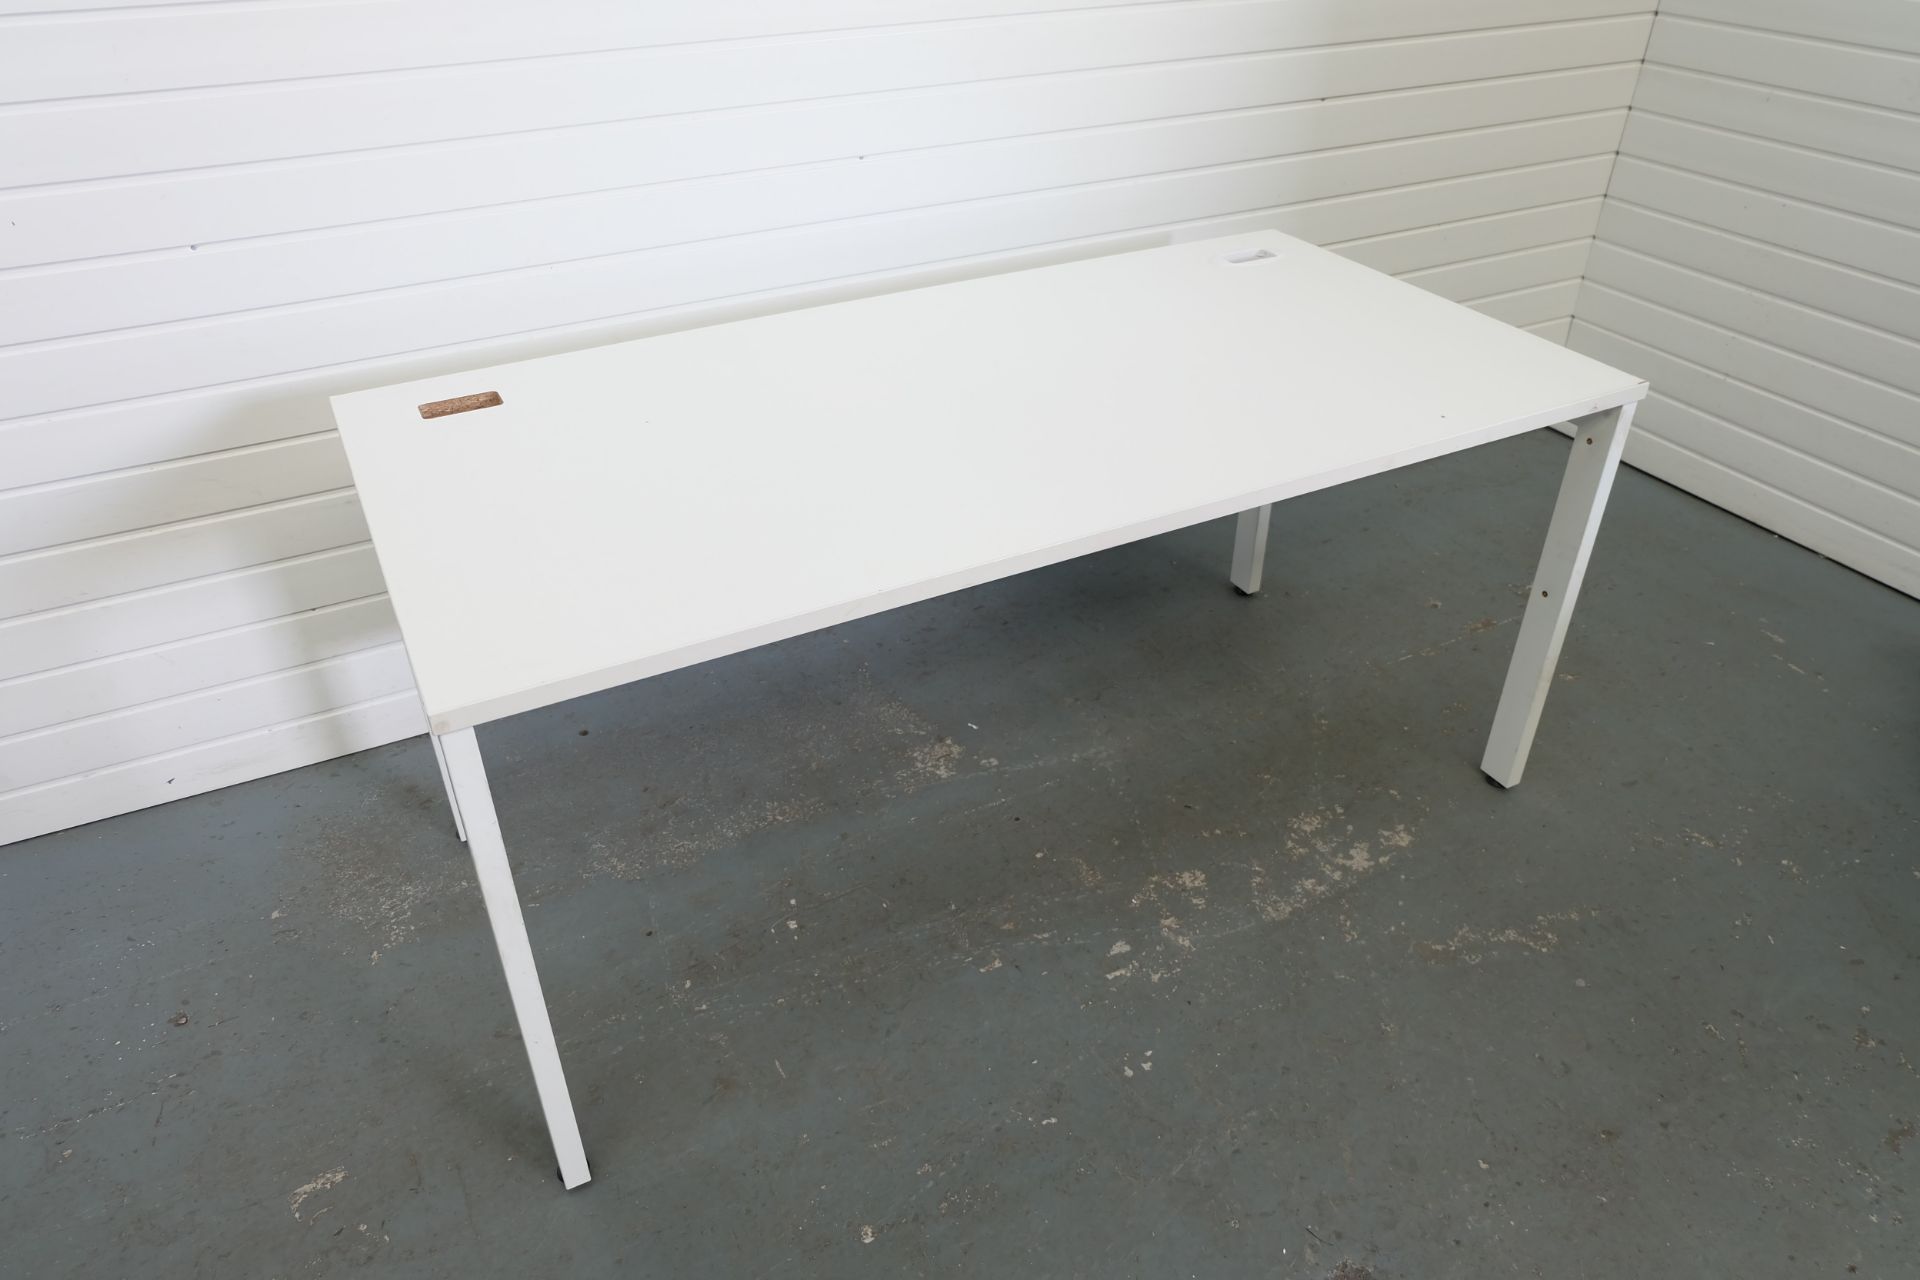 White Desk With Metal Legs and Adjustable Feet. 2 x Holes for Wires. Size 1600mm x 800mm x 730mm Hig - Image 2 of 4